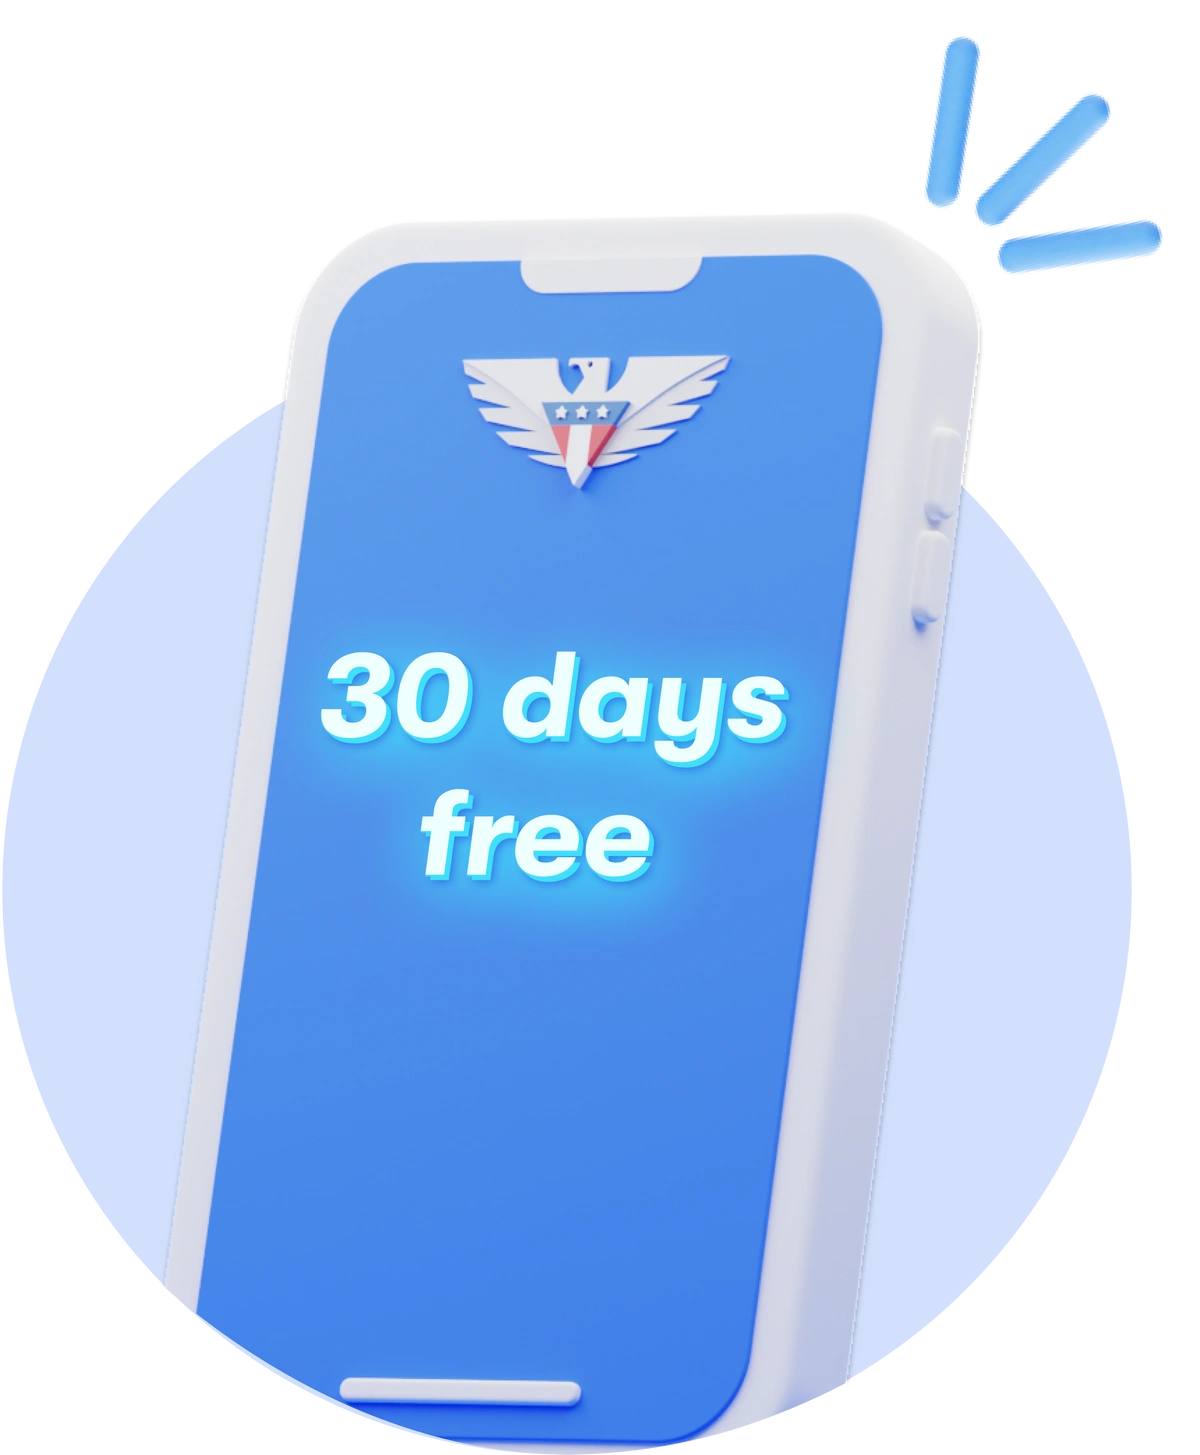 Illustration of phone with US Mobile logo displaying the words 30 days free